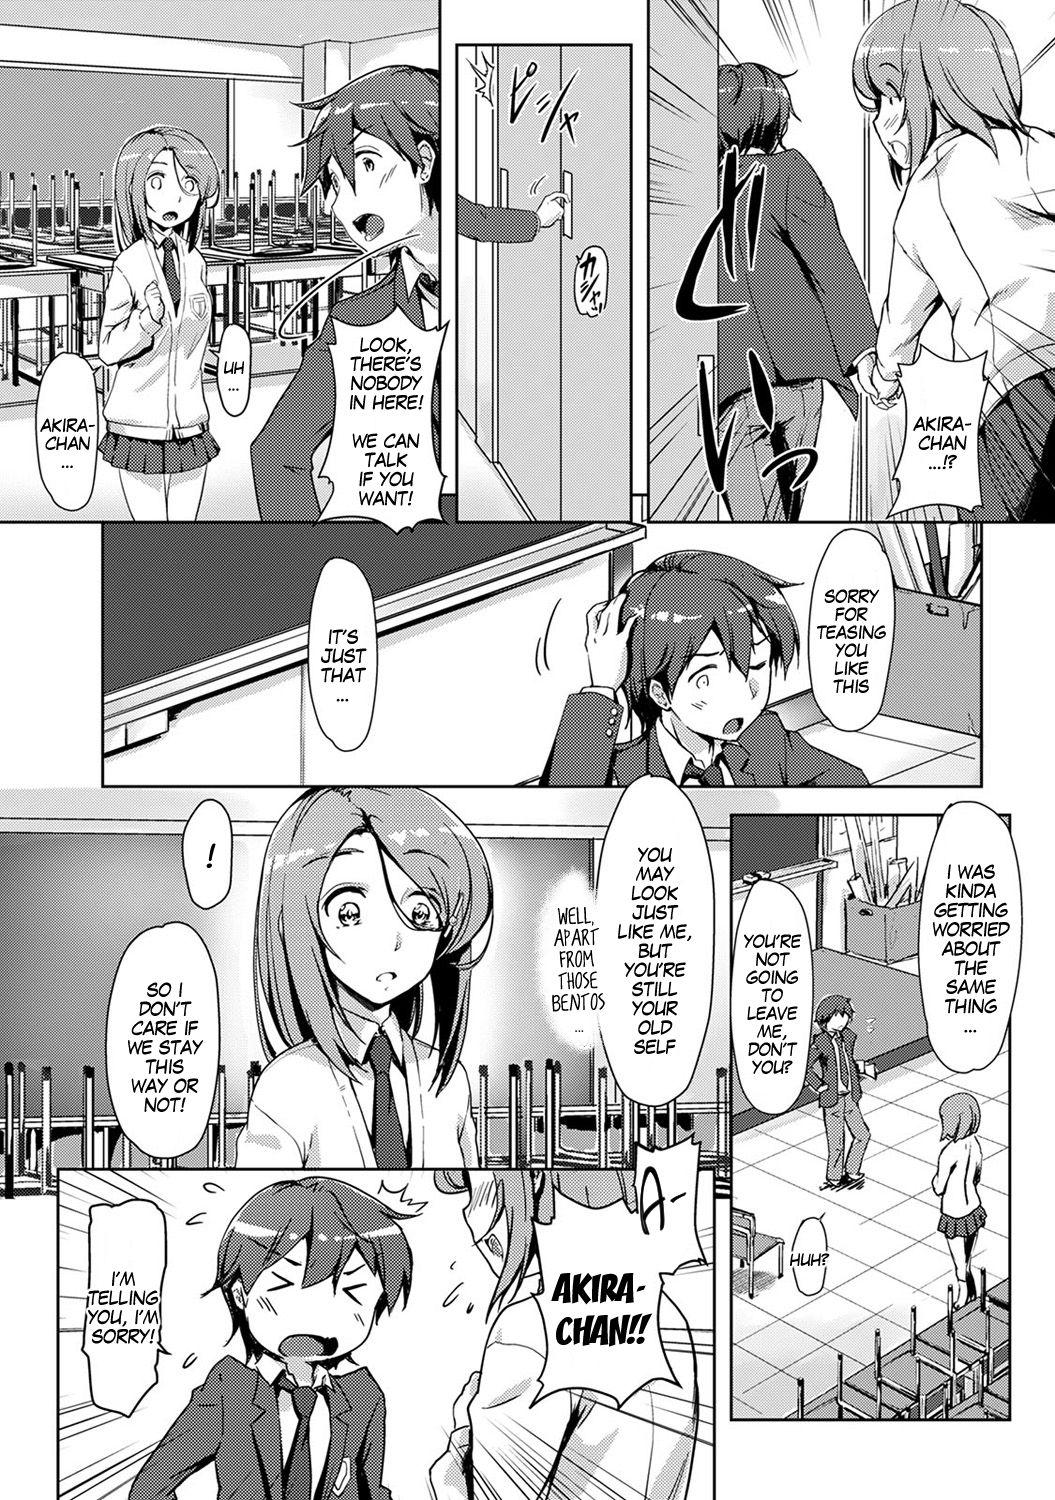 Amateur Sex Ecchi Shitara Irekawacchatta!? | We Switched Our Bodies After Having Sex!? Ch. 3 Hijab - Page 10